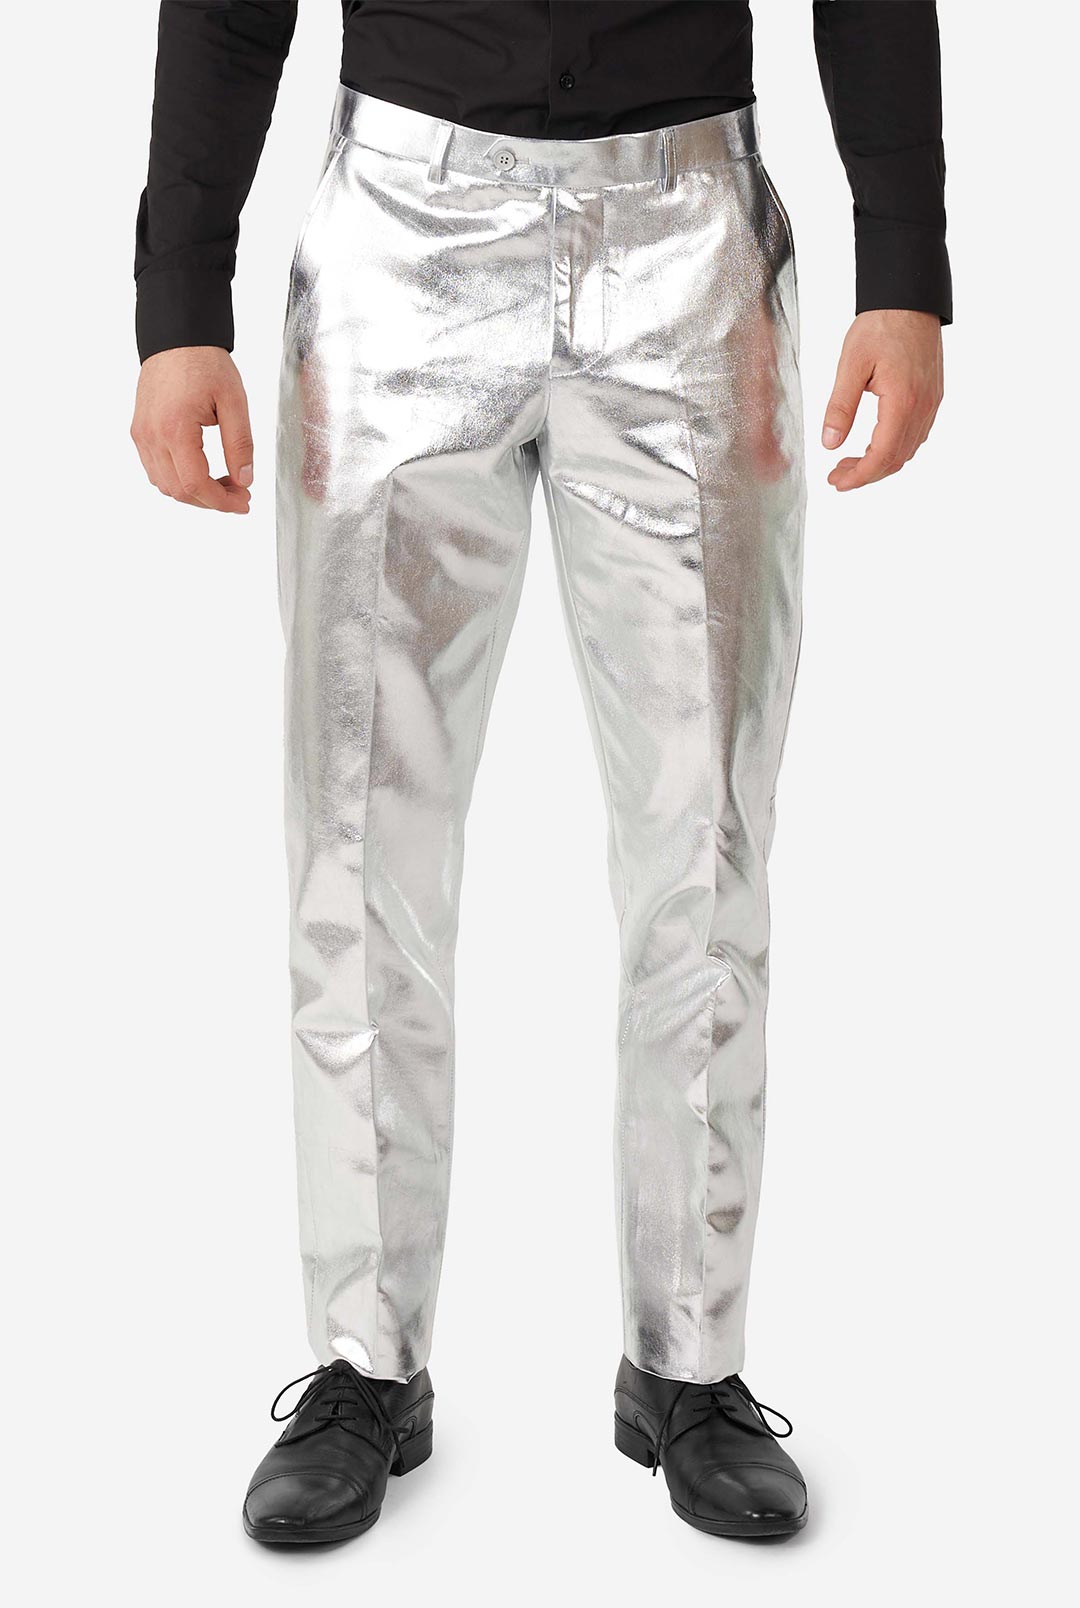 Buy 424 Gray Metallic Trousers - Silver At 63% Off | Editorialist